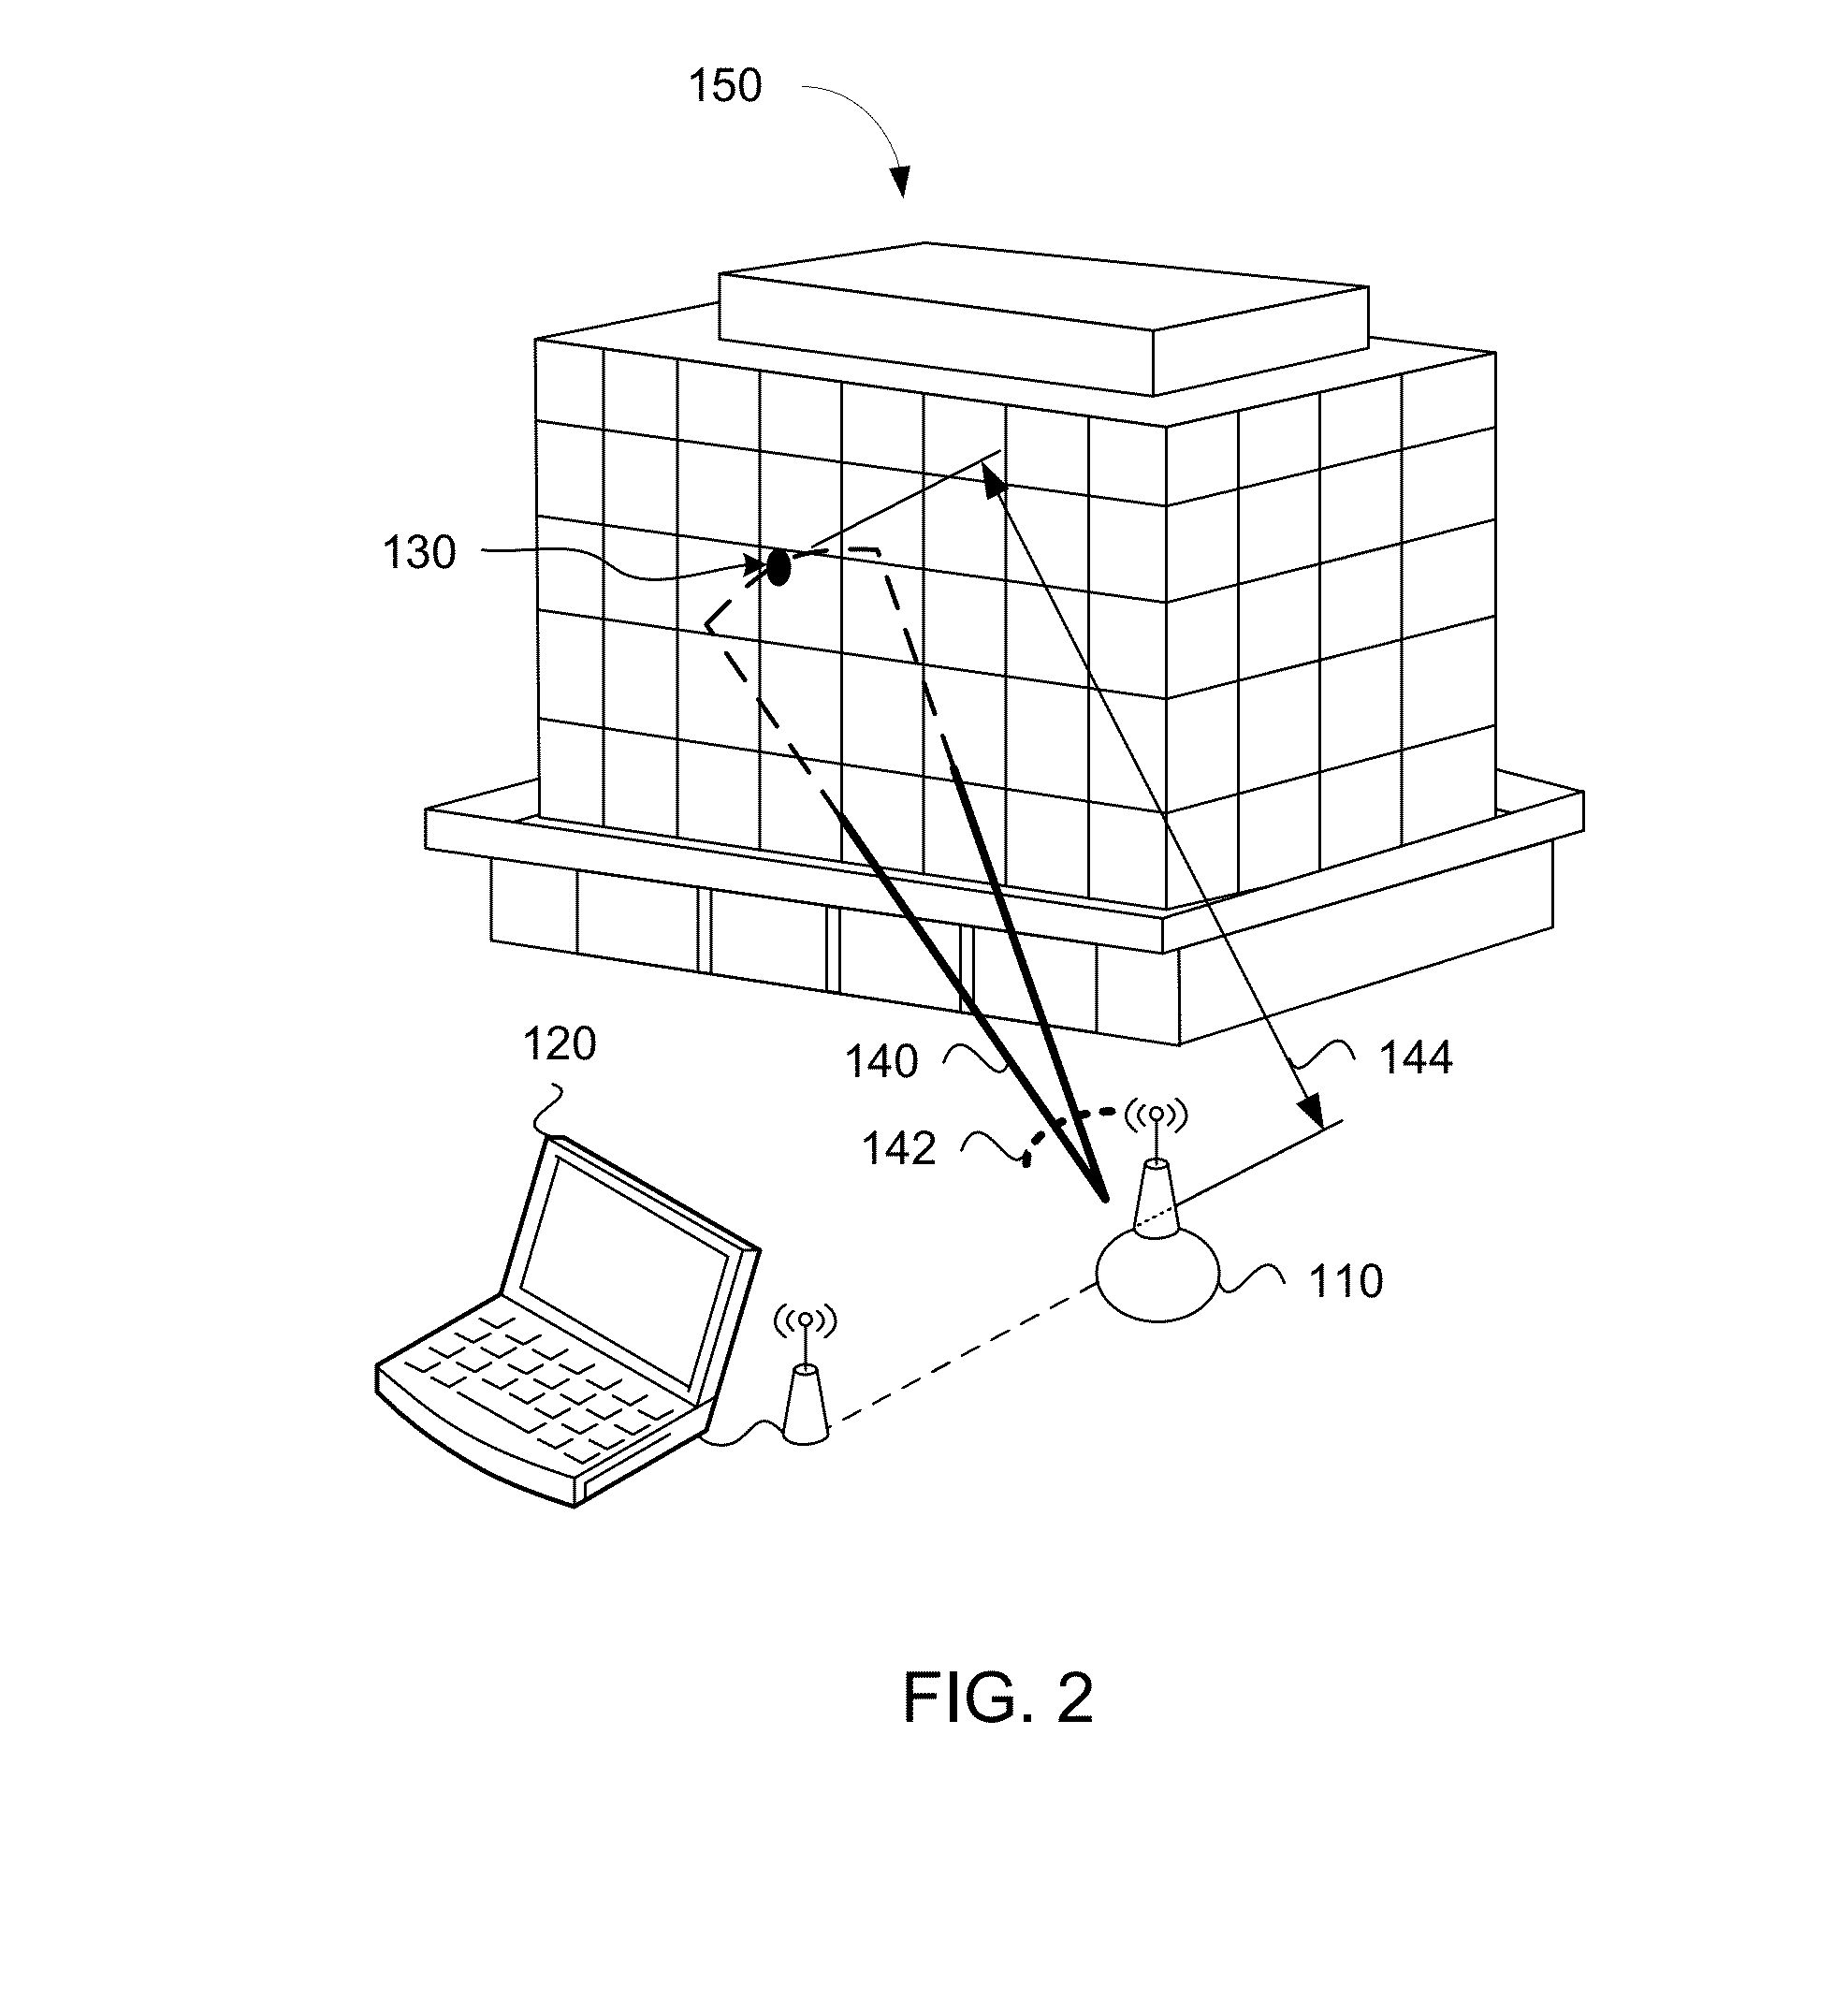 Beacon and associated components for a ranging system